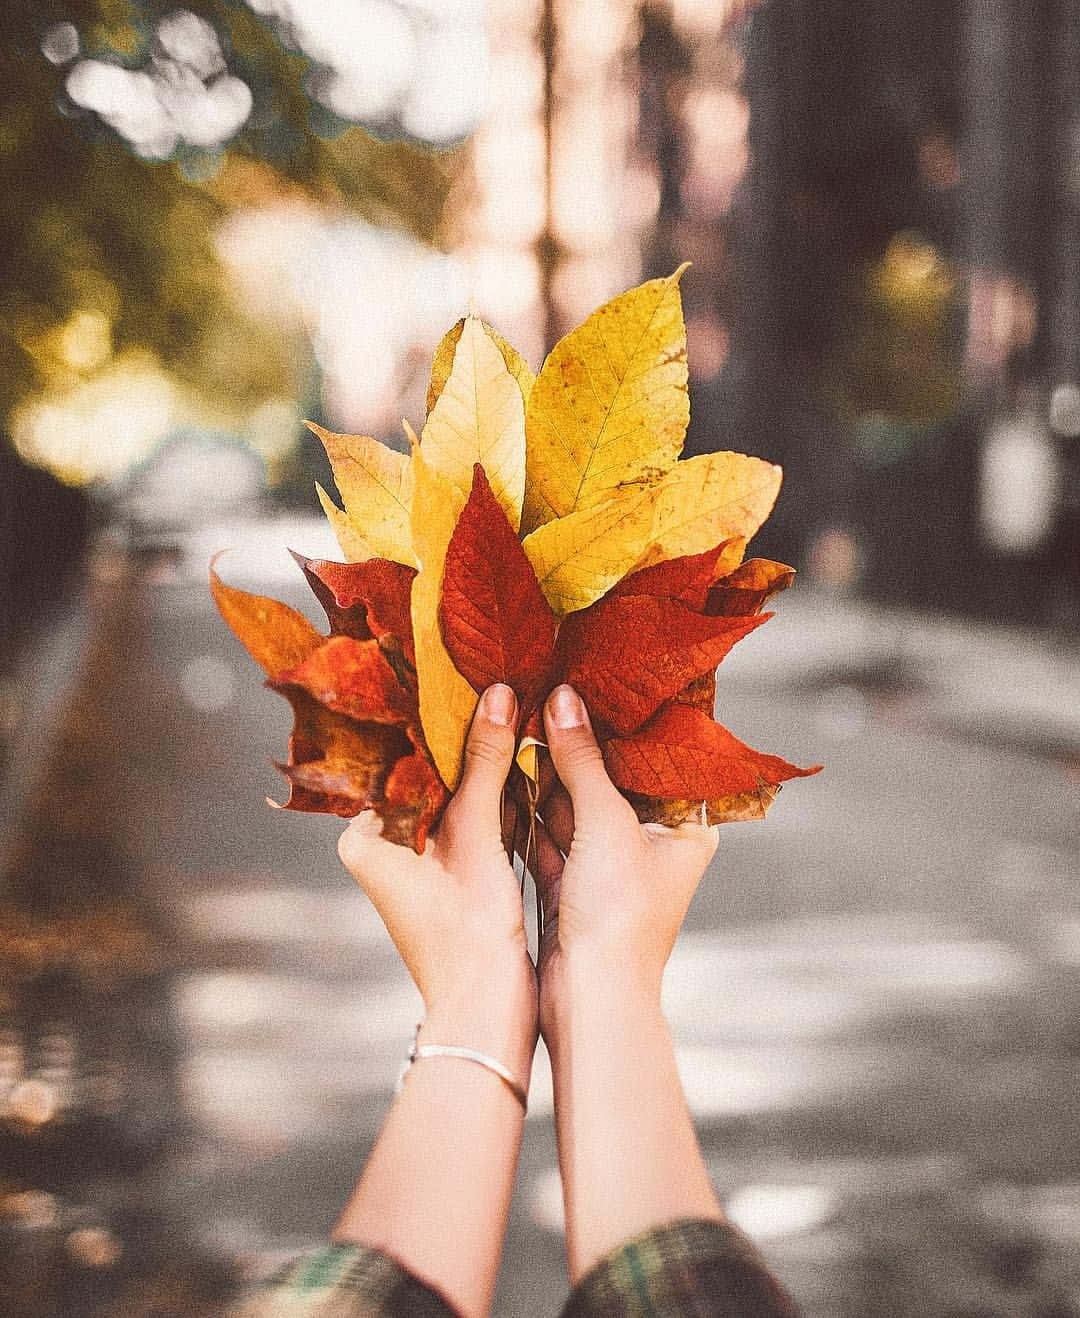 A Person Holding Up A Bunch Of Autumn Leaves